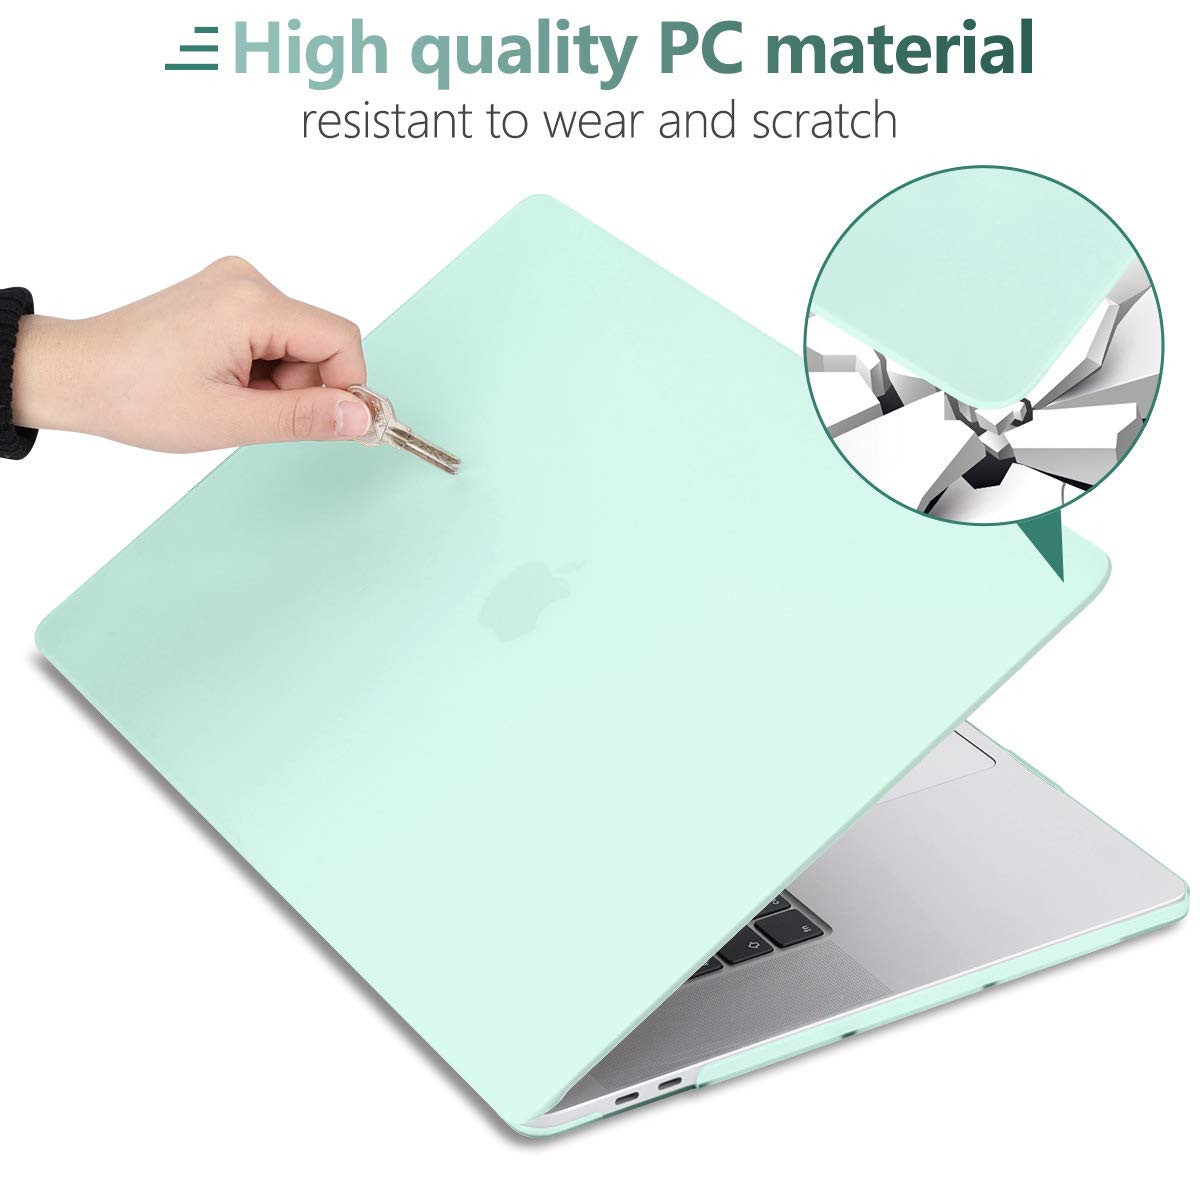 Suitable for  Green MacBook Pro 13 Inch Case 2016-2023 M1 M2 A2338 A2289 A2251 A2159 Hard Shell Case Keyboard Cover